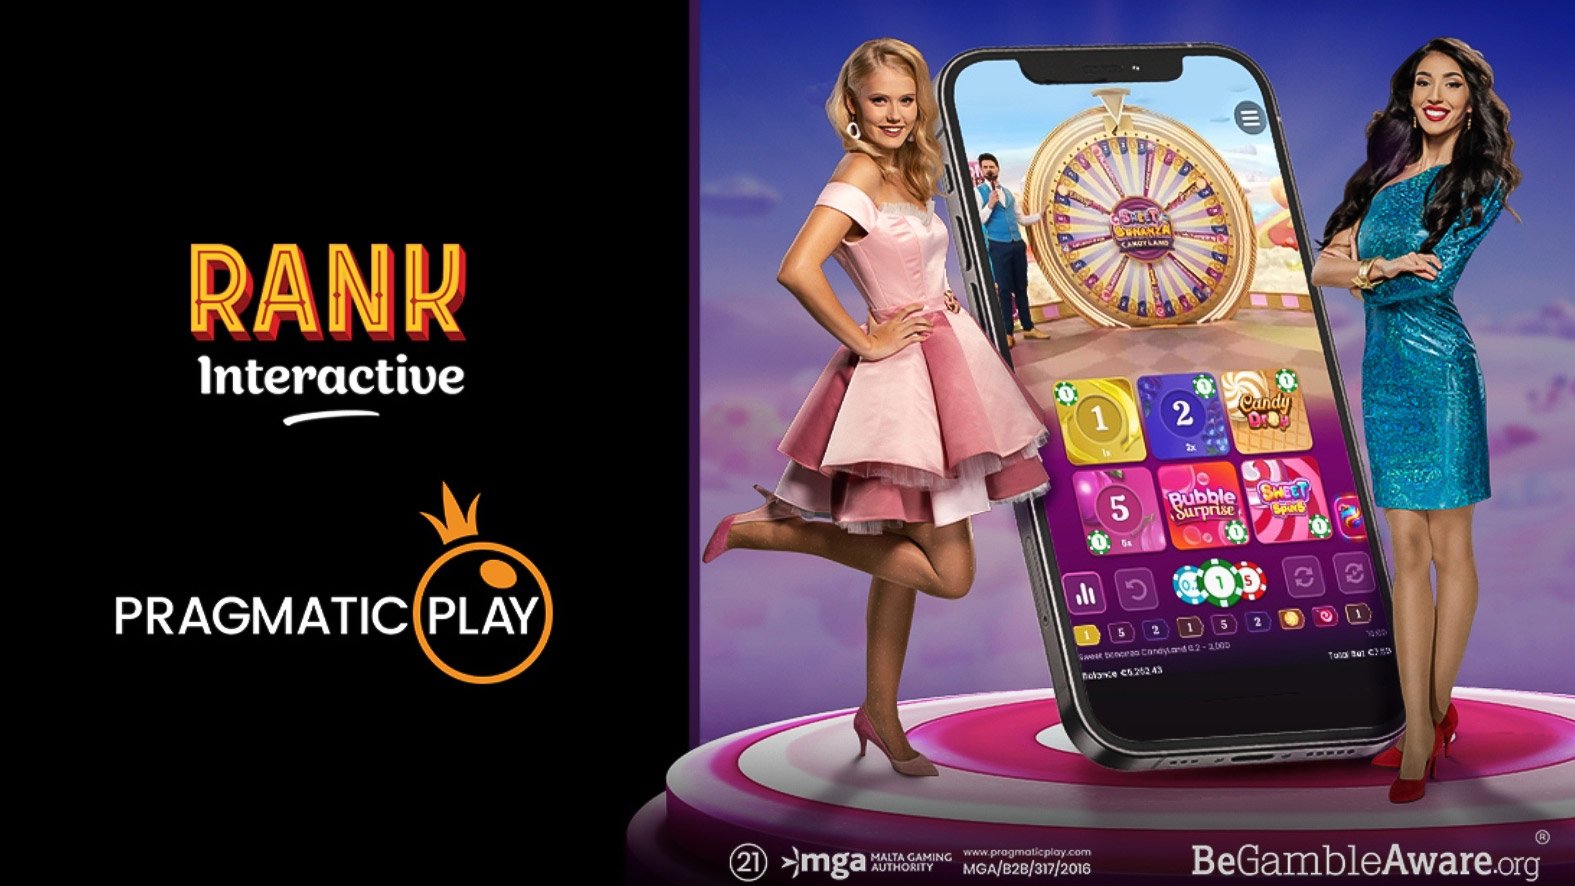 Pragmatic Play expands its partnership with UK’s Rank Group to add Live Casino content | Yogonet International